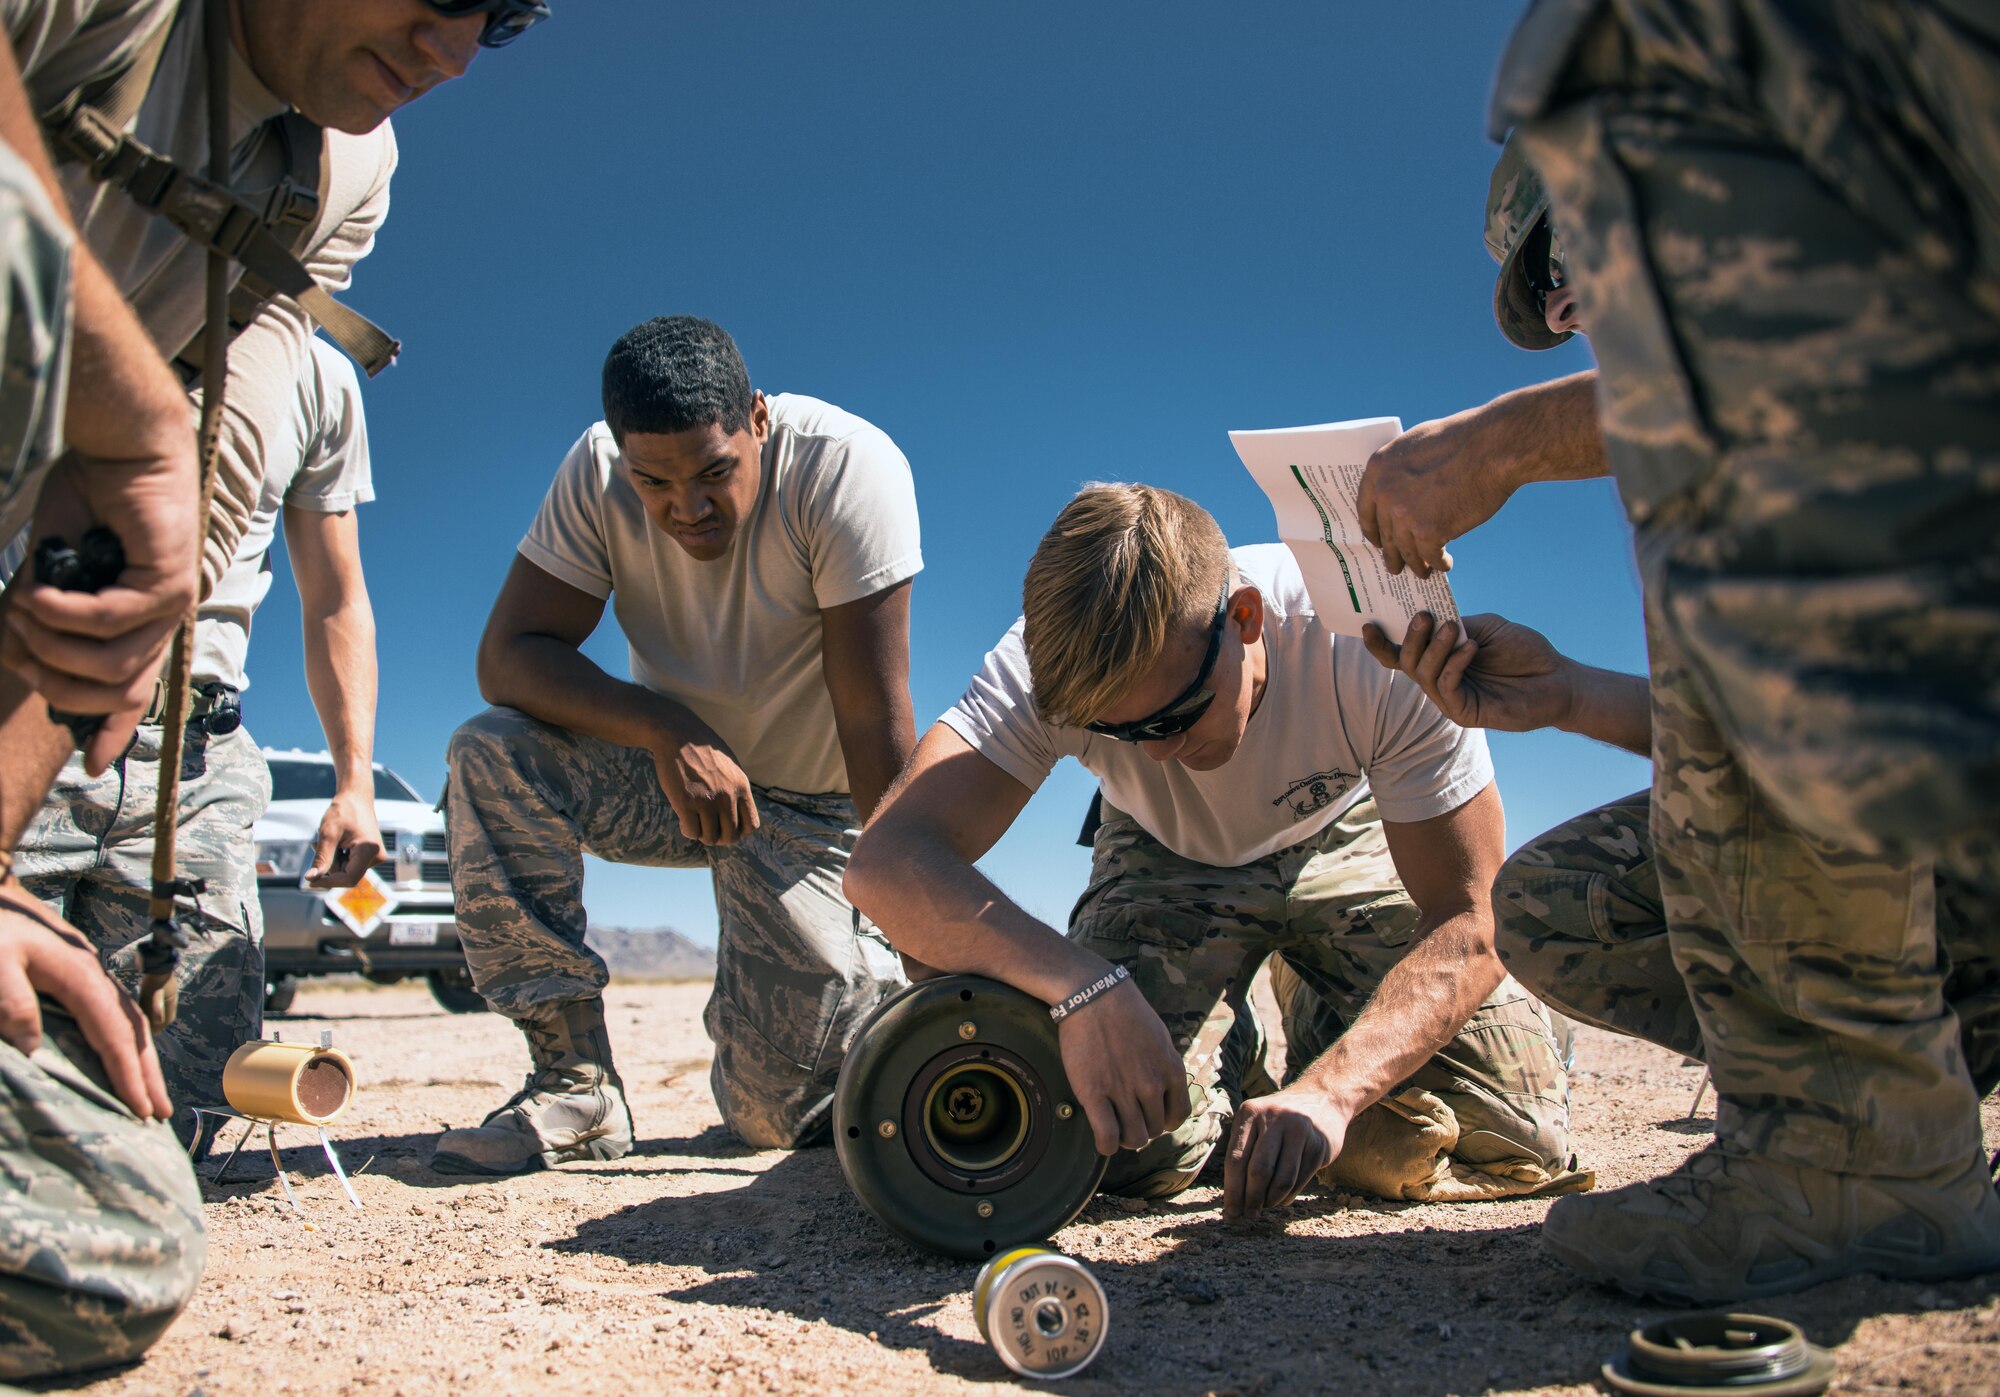 Senior Airman Jared Ball, 56th Civil Engineer Squadron explosive ordinance disposal team member, performs render safe procedures on a Mark 81 bomb at the Gila Bend Air Force Auxiliary Field in Gila Bend, Ariz., Sept. 21, 2017. The render safe procedure is the act of applying special EOD procedures, methods and tools to provide the interruption of functions or separations of essential components of unexploded ordnance to prevent an unacceptable detonation. (U.S. Air Force photo/Airman 1st Class Alexander Cook)